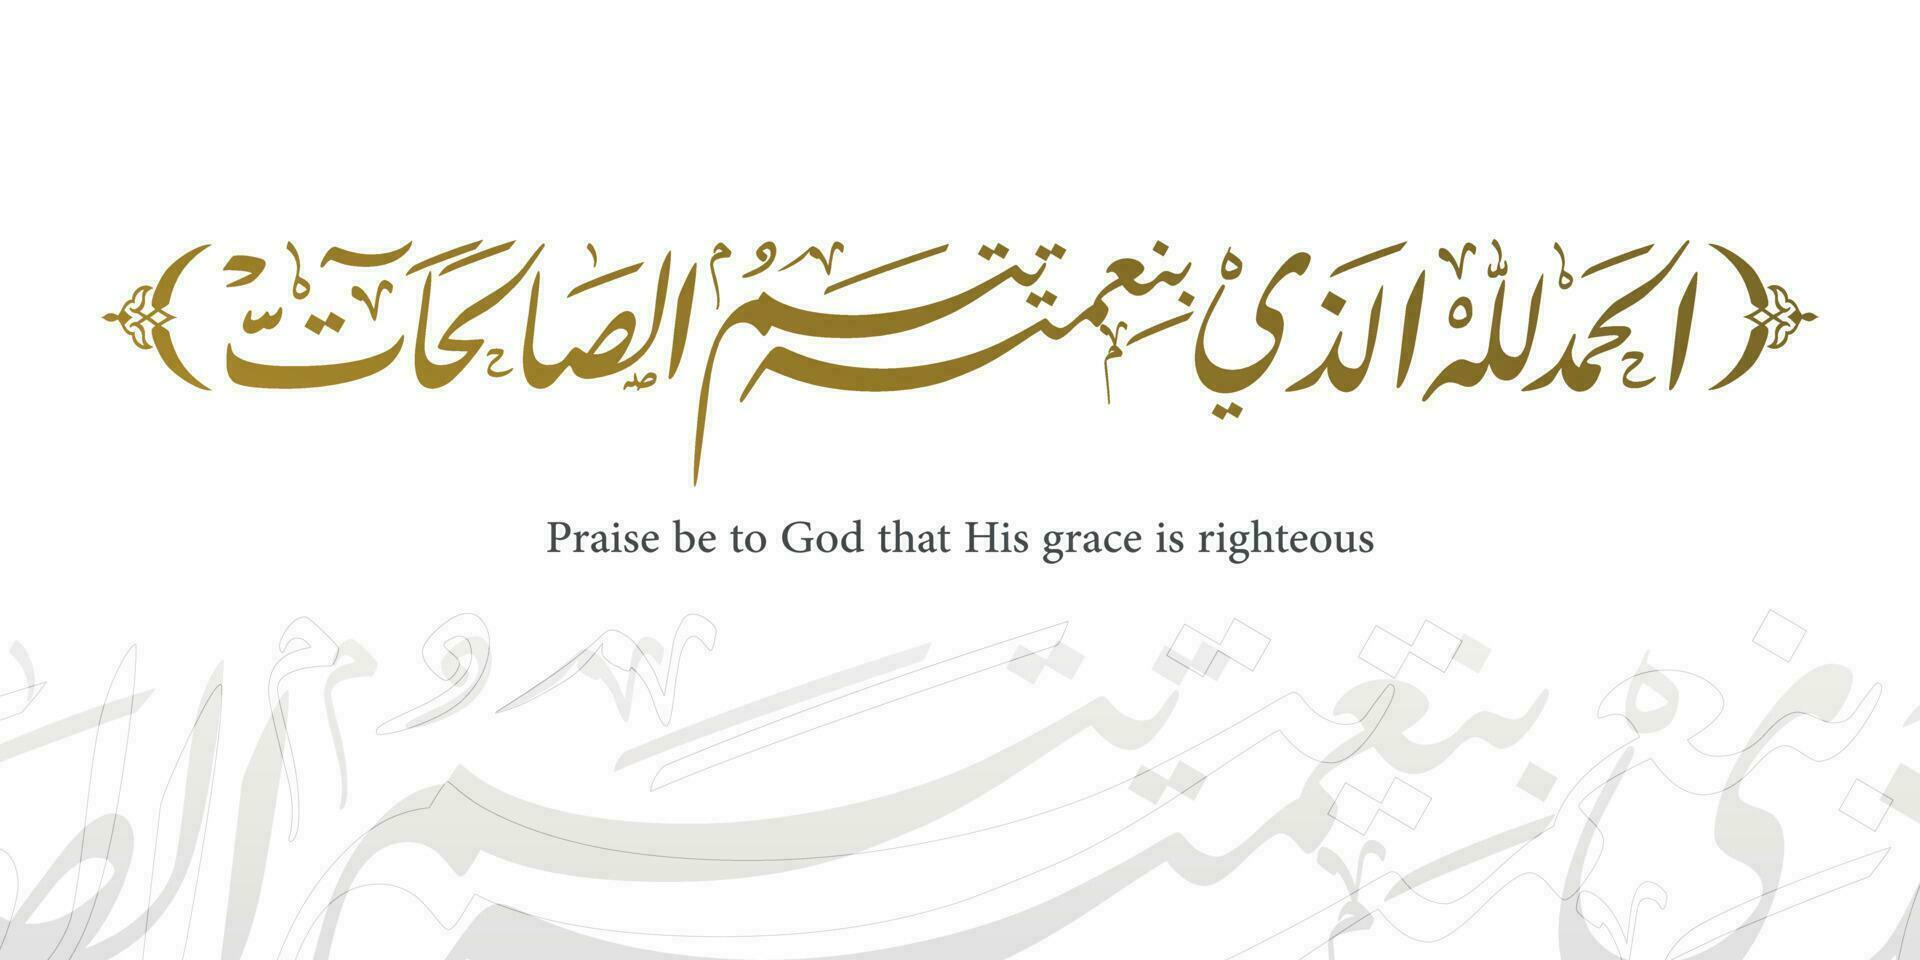 Praise be to God that His grace is righteous - thank god in Arabic calligraphy wedding prayer khat thuluth Arabic Calligraphy of HADITH CHARIF, when the Prophet Muhammad saws saw something he like vector